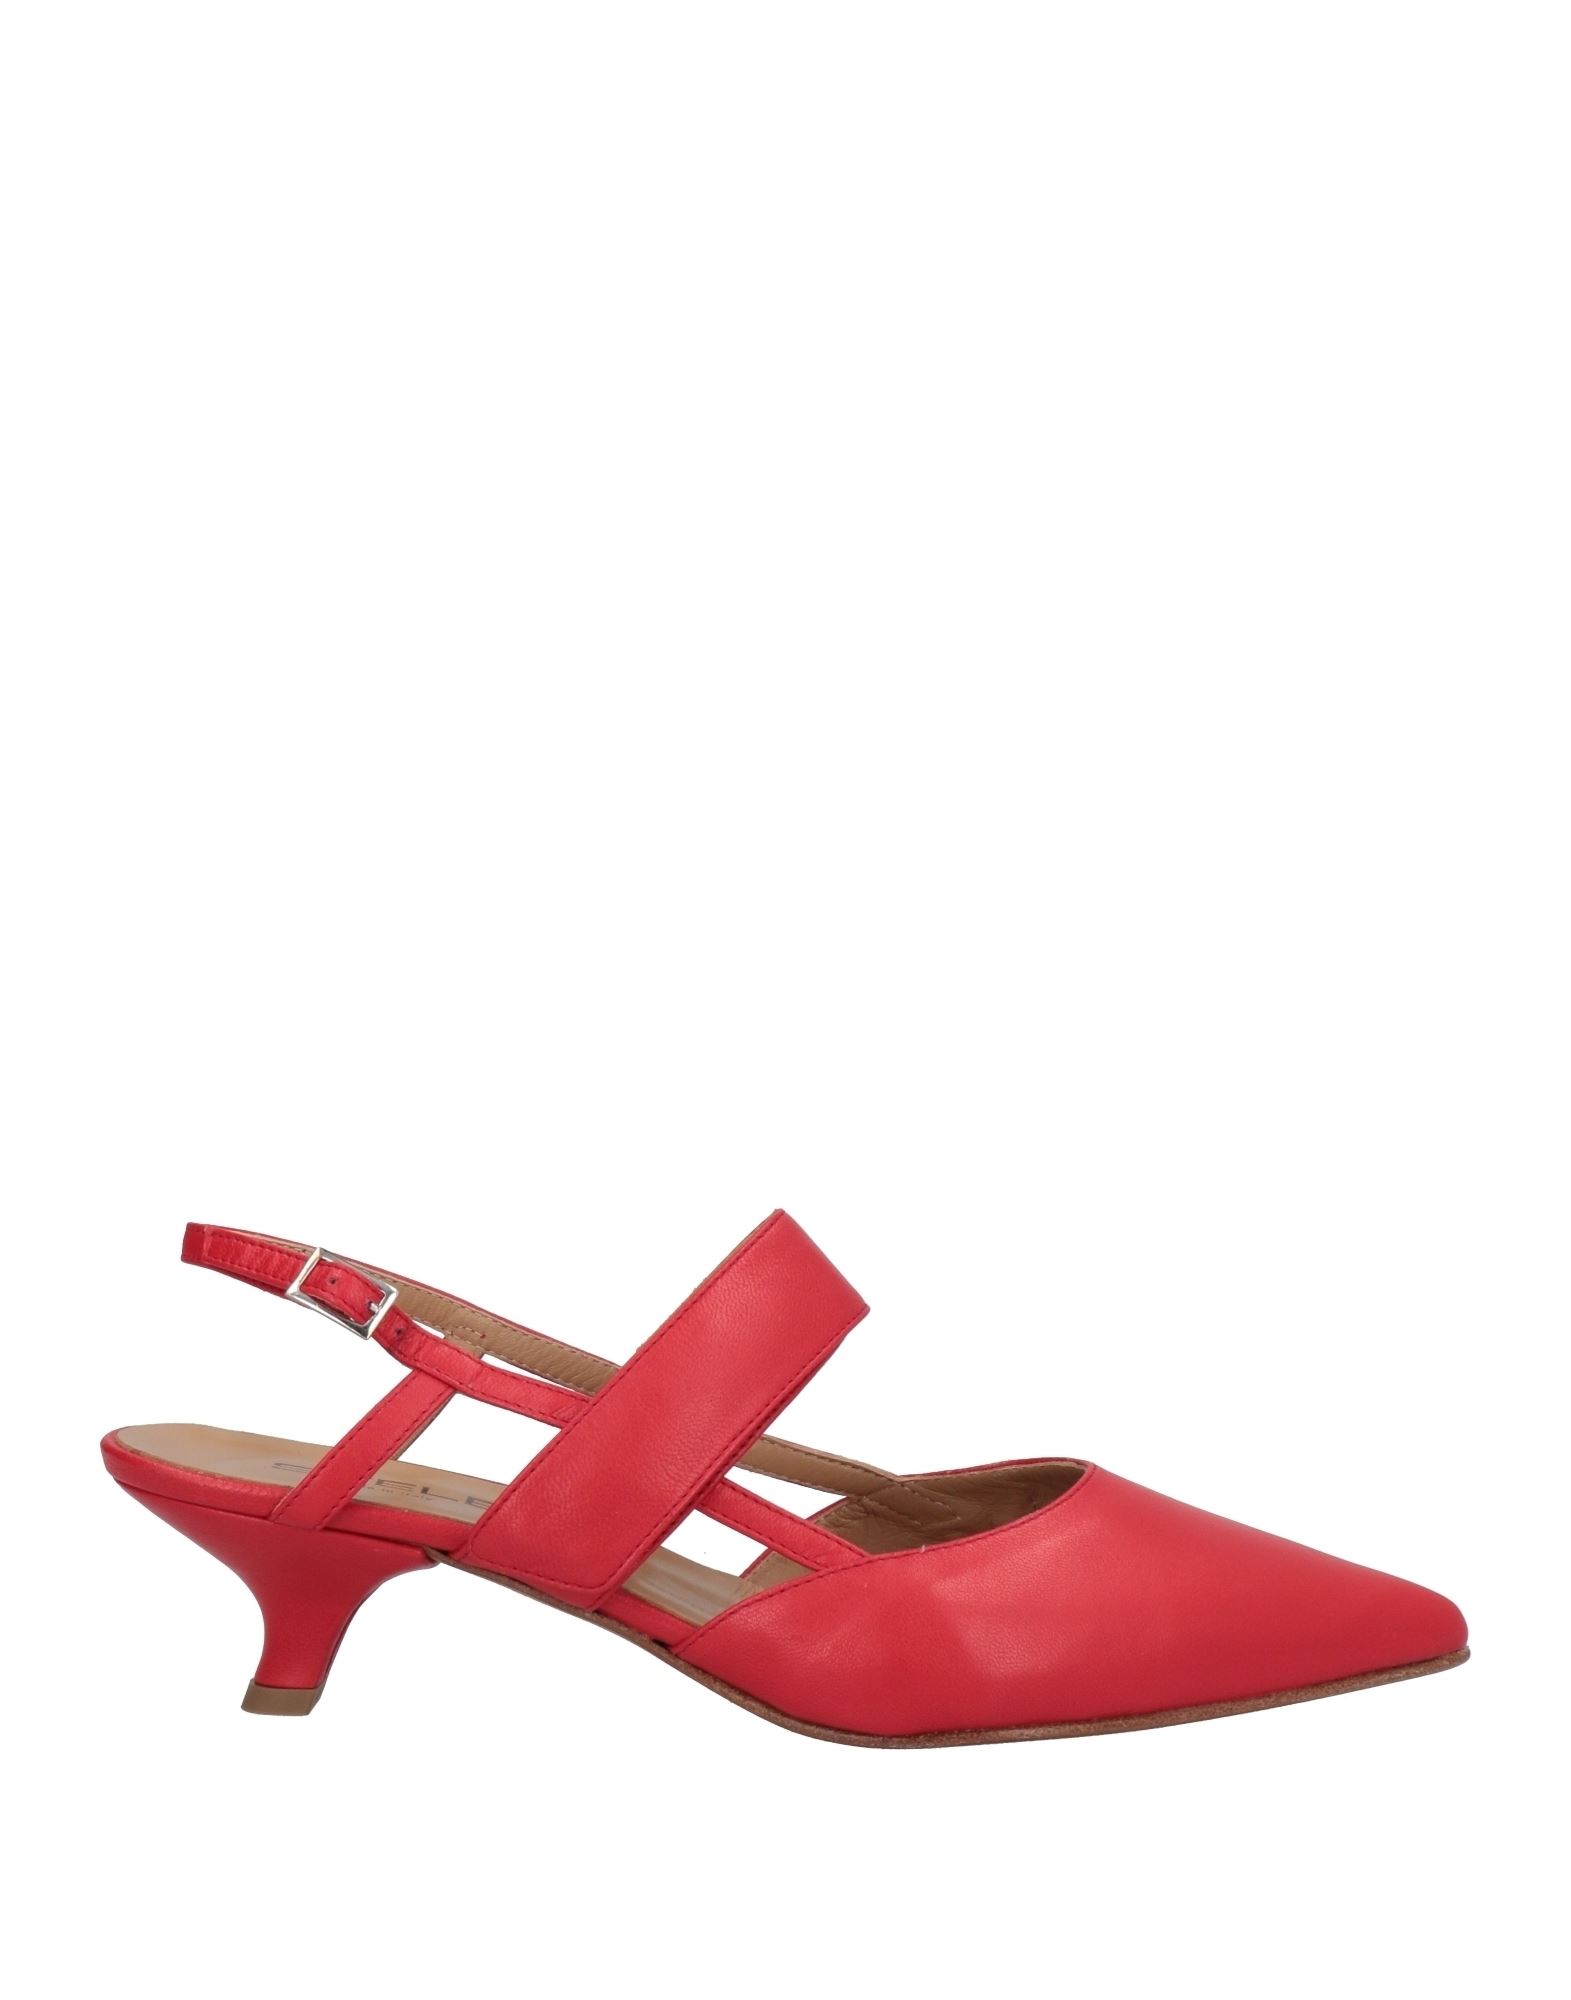 Stele Pumps In Red